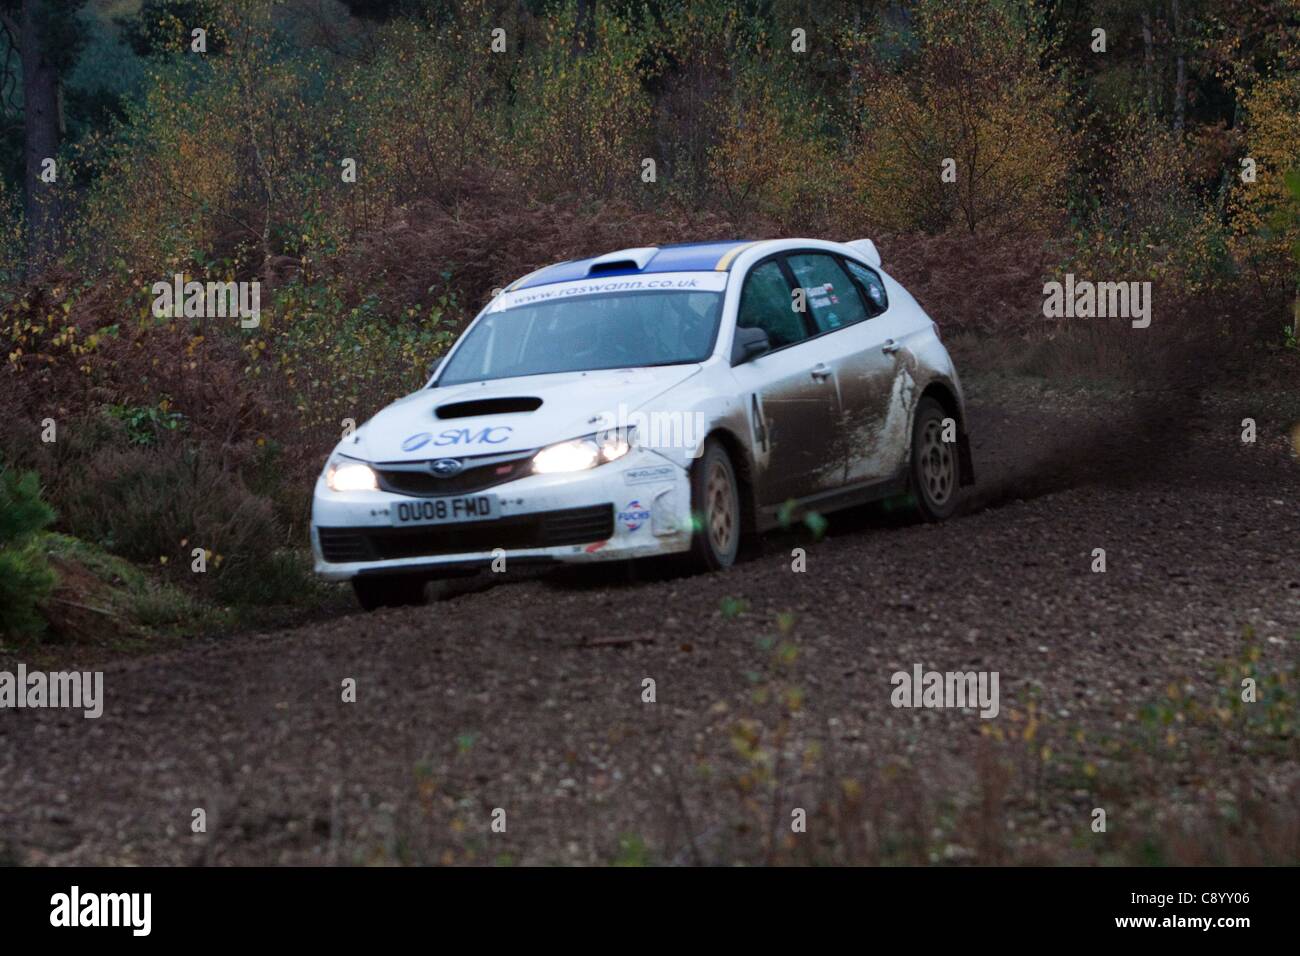 Cars competing in the Tempest Rally, Eversley. The Tempest Rally is a one day gravel stage rally in Southern England. Stock Photo